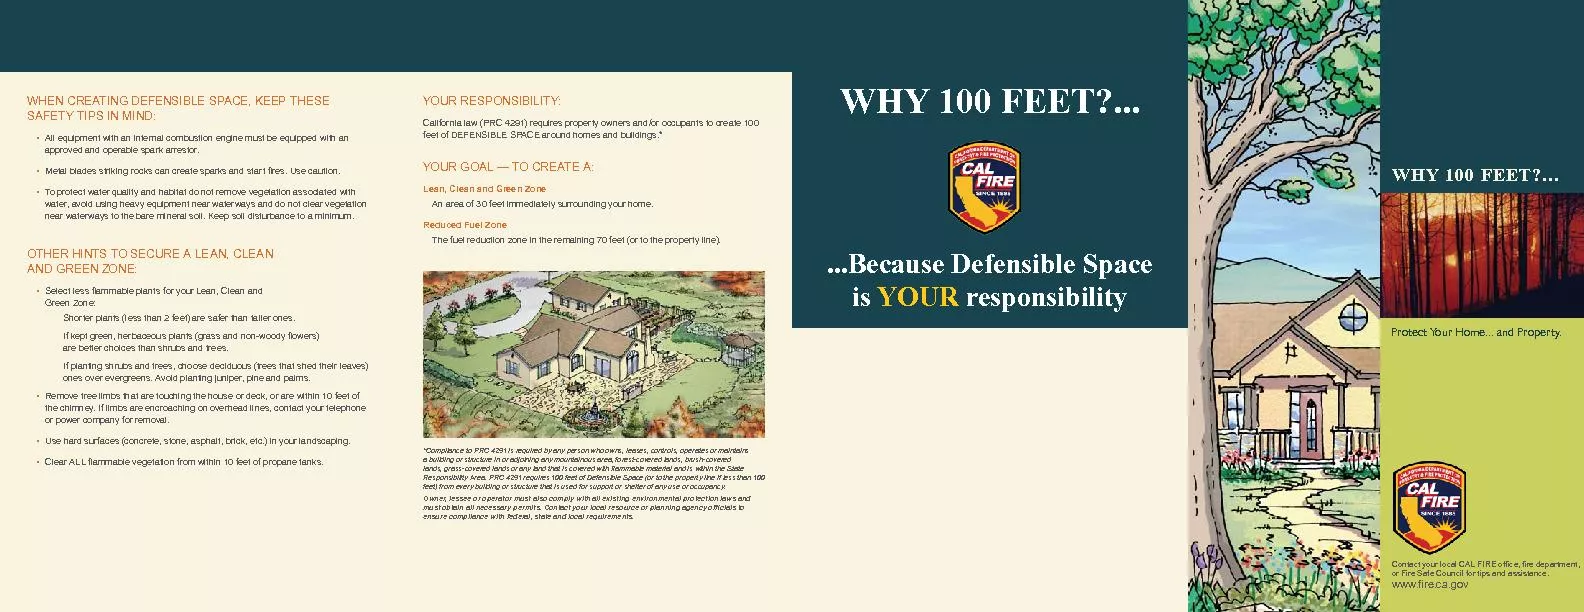 Protect Your Home... and Property.WHY 100 FEET?...